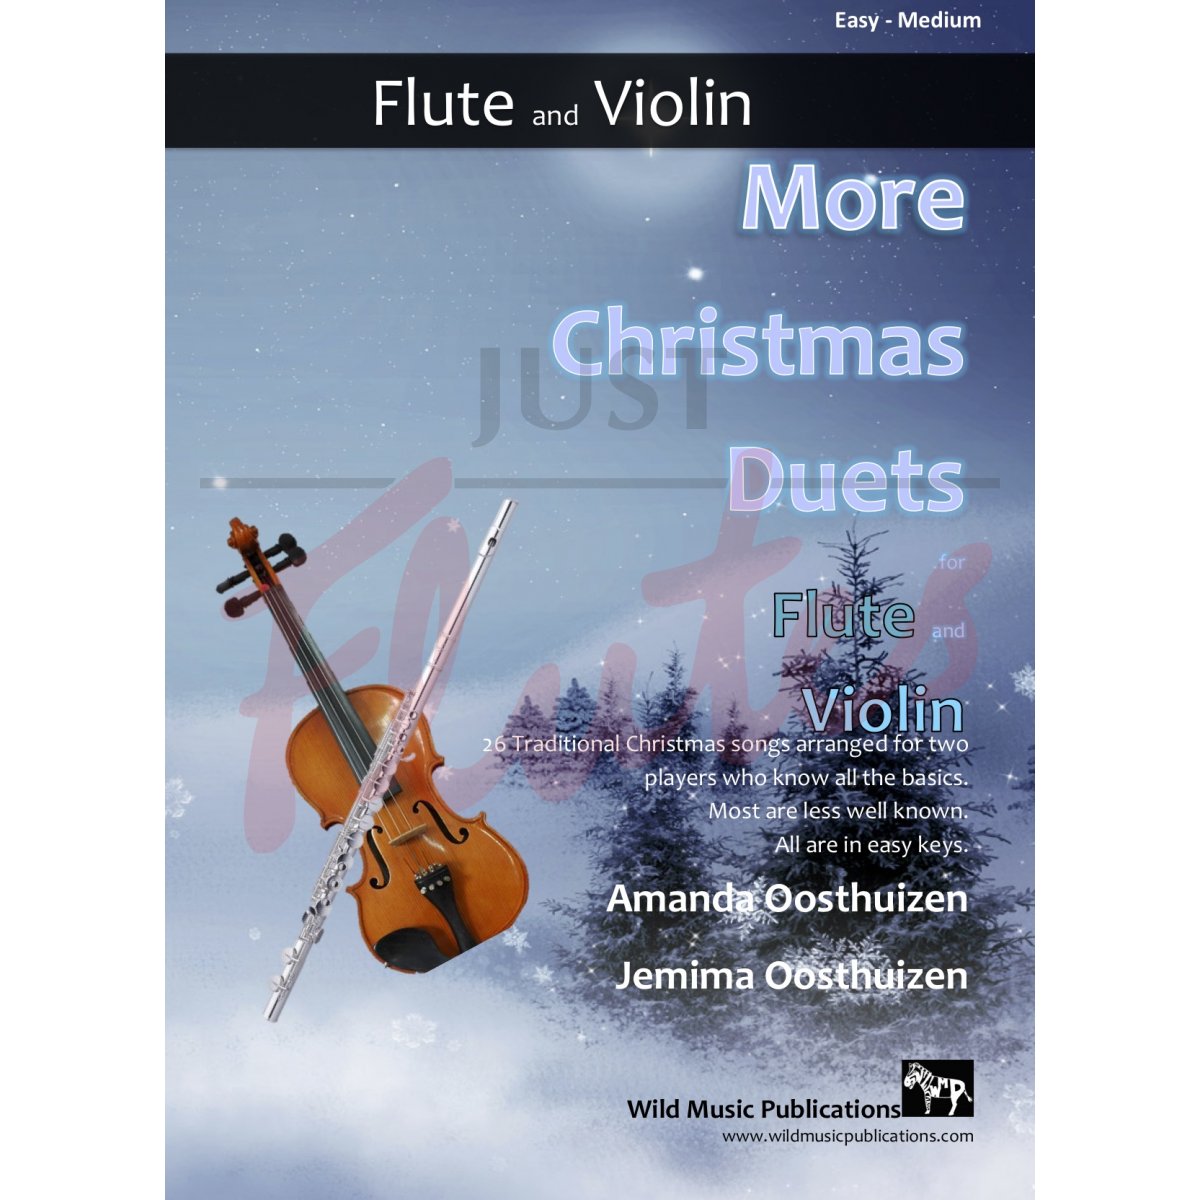 More Christmas Duets for Flute and Violin